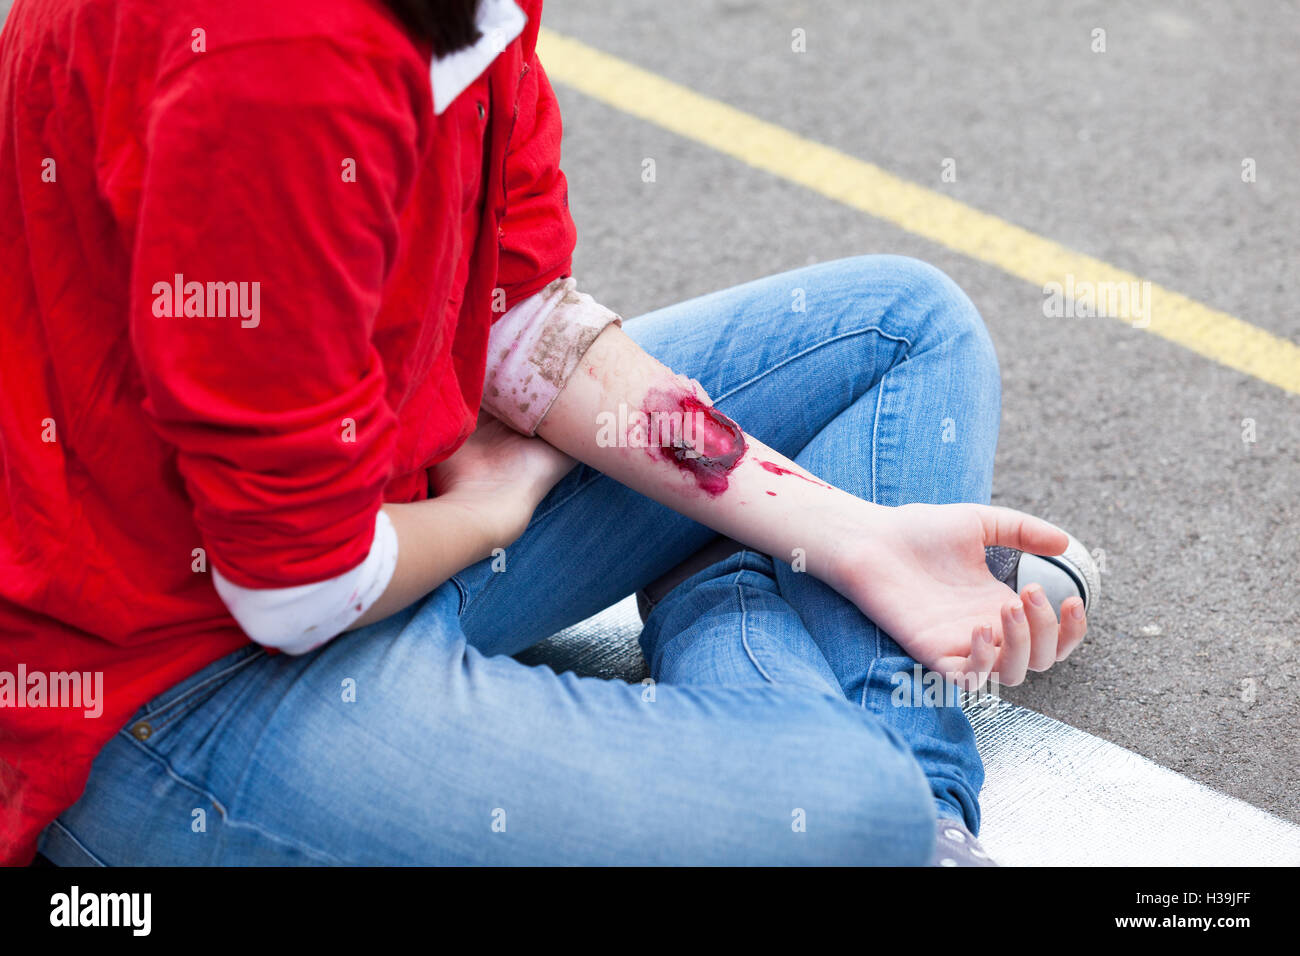 First aid training. Hand injury. Stage makeup. Stock Photo